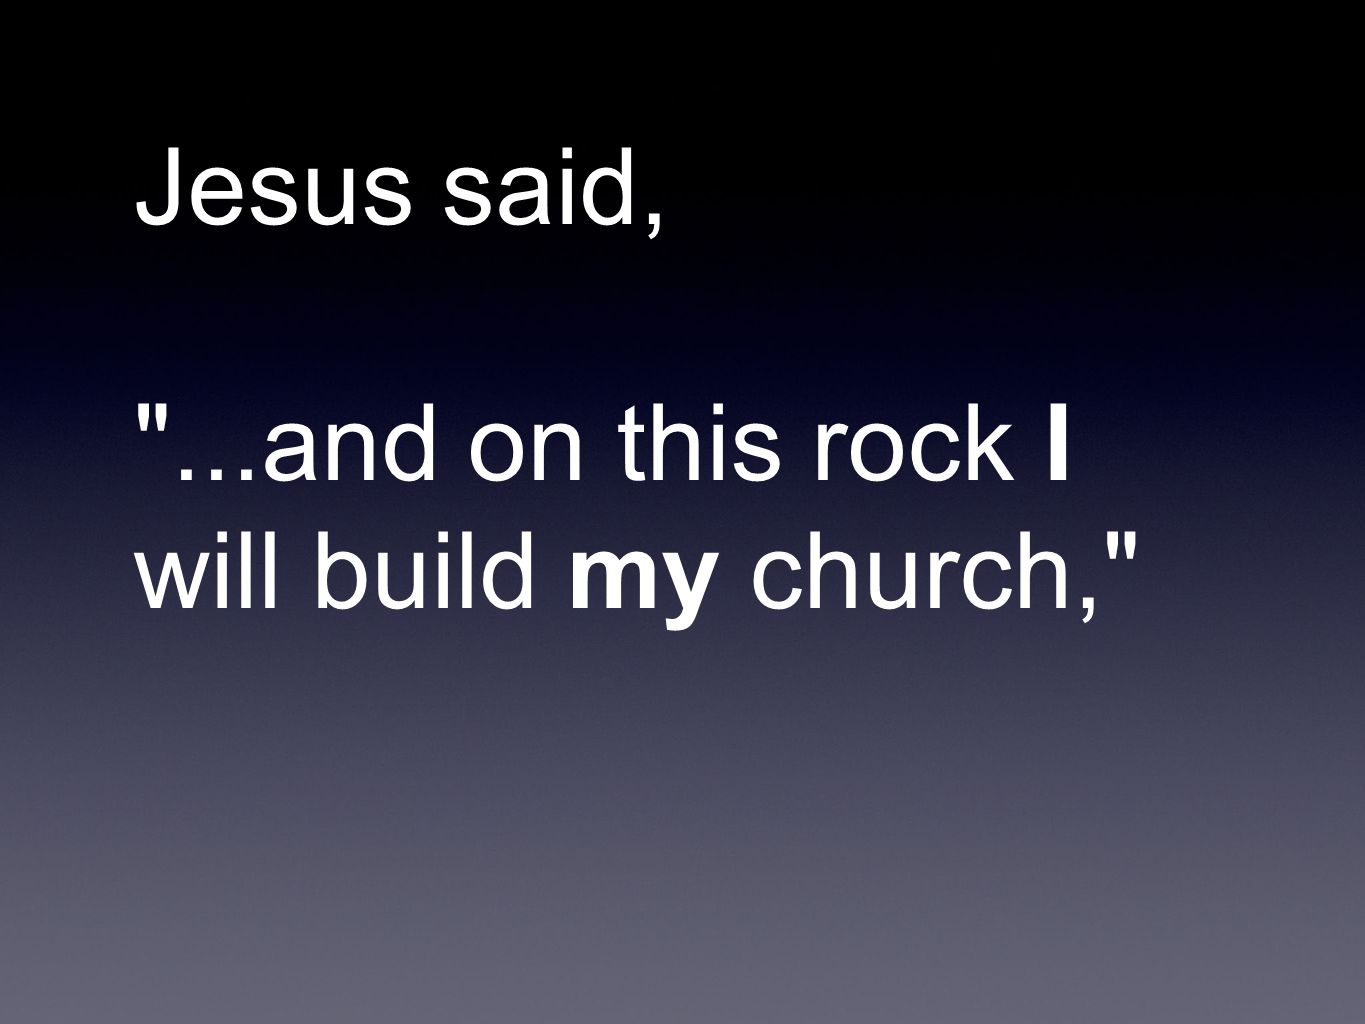 Jesus said, ...and on this rock I will build my church,